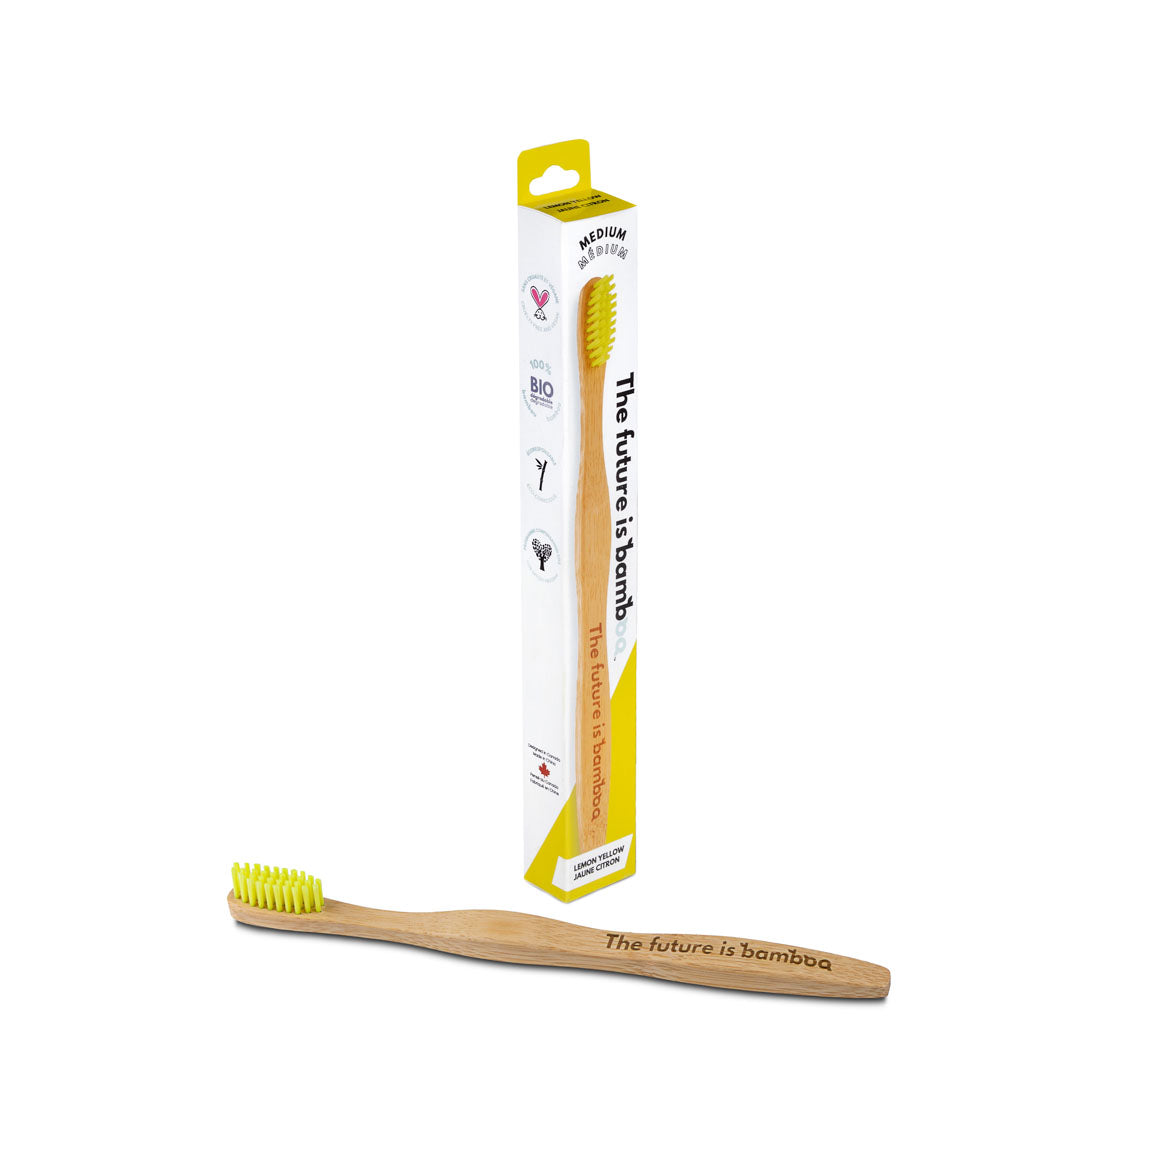 NEW! Adult MEDIUM Toothbrushes | 6-Pack - The Future is Bamboo 